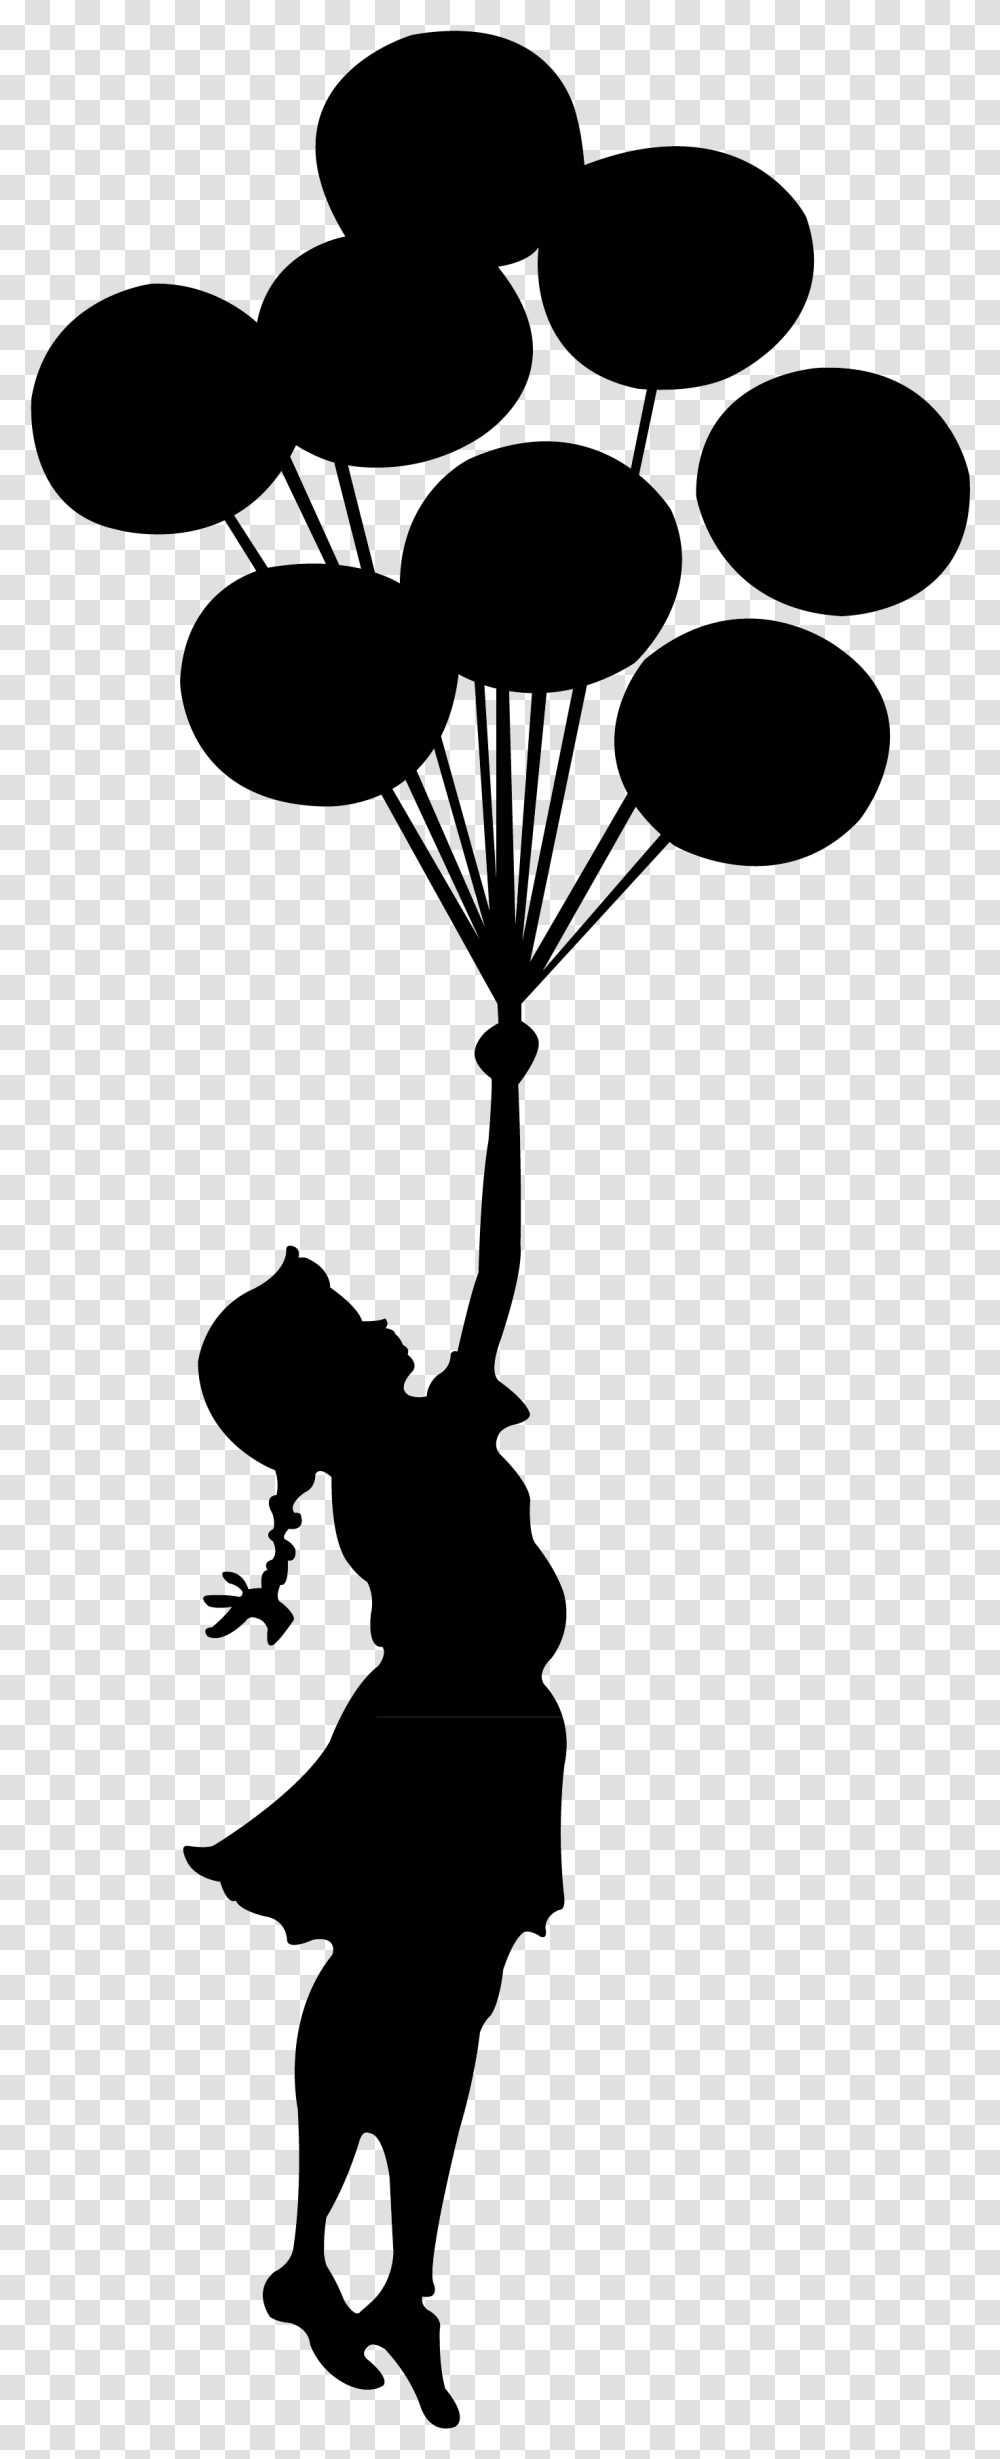 Girl Holding At Getdrawings Petite Fille Avec Ballon, Spider Web, Person, Human, Droplet Transparent Png